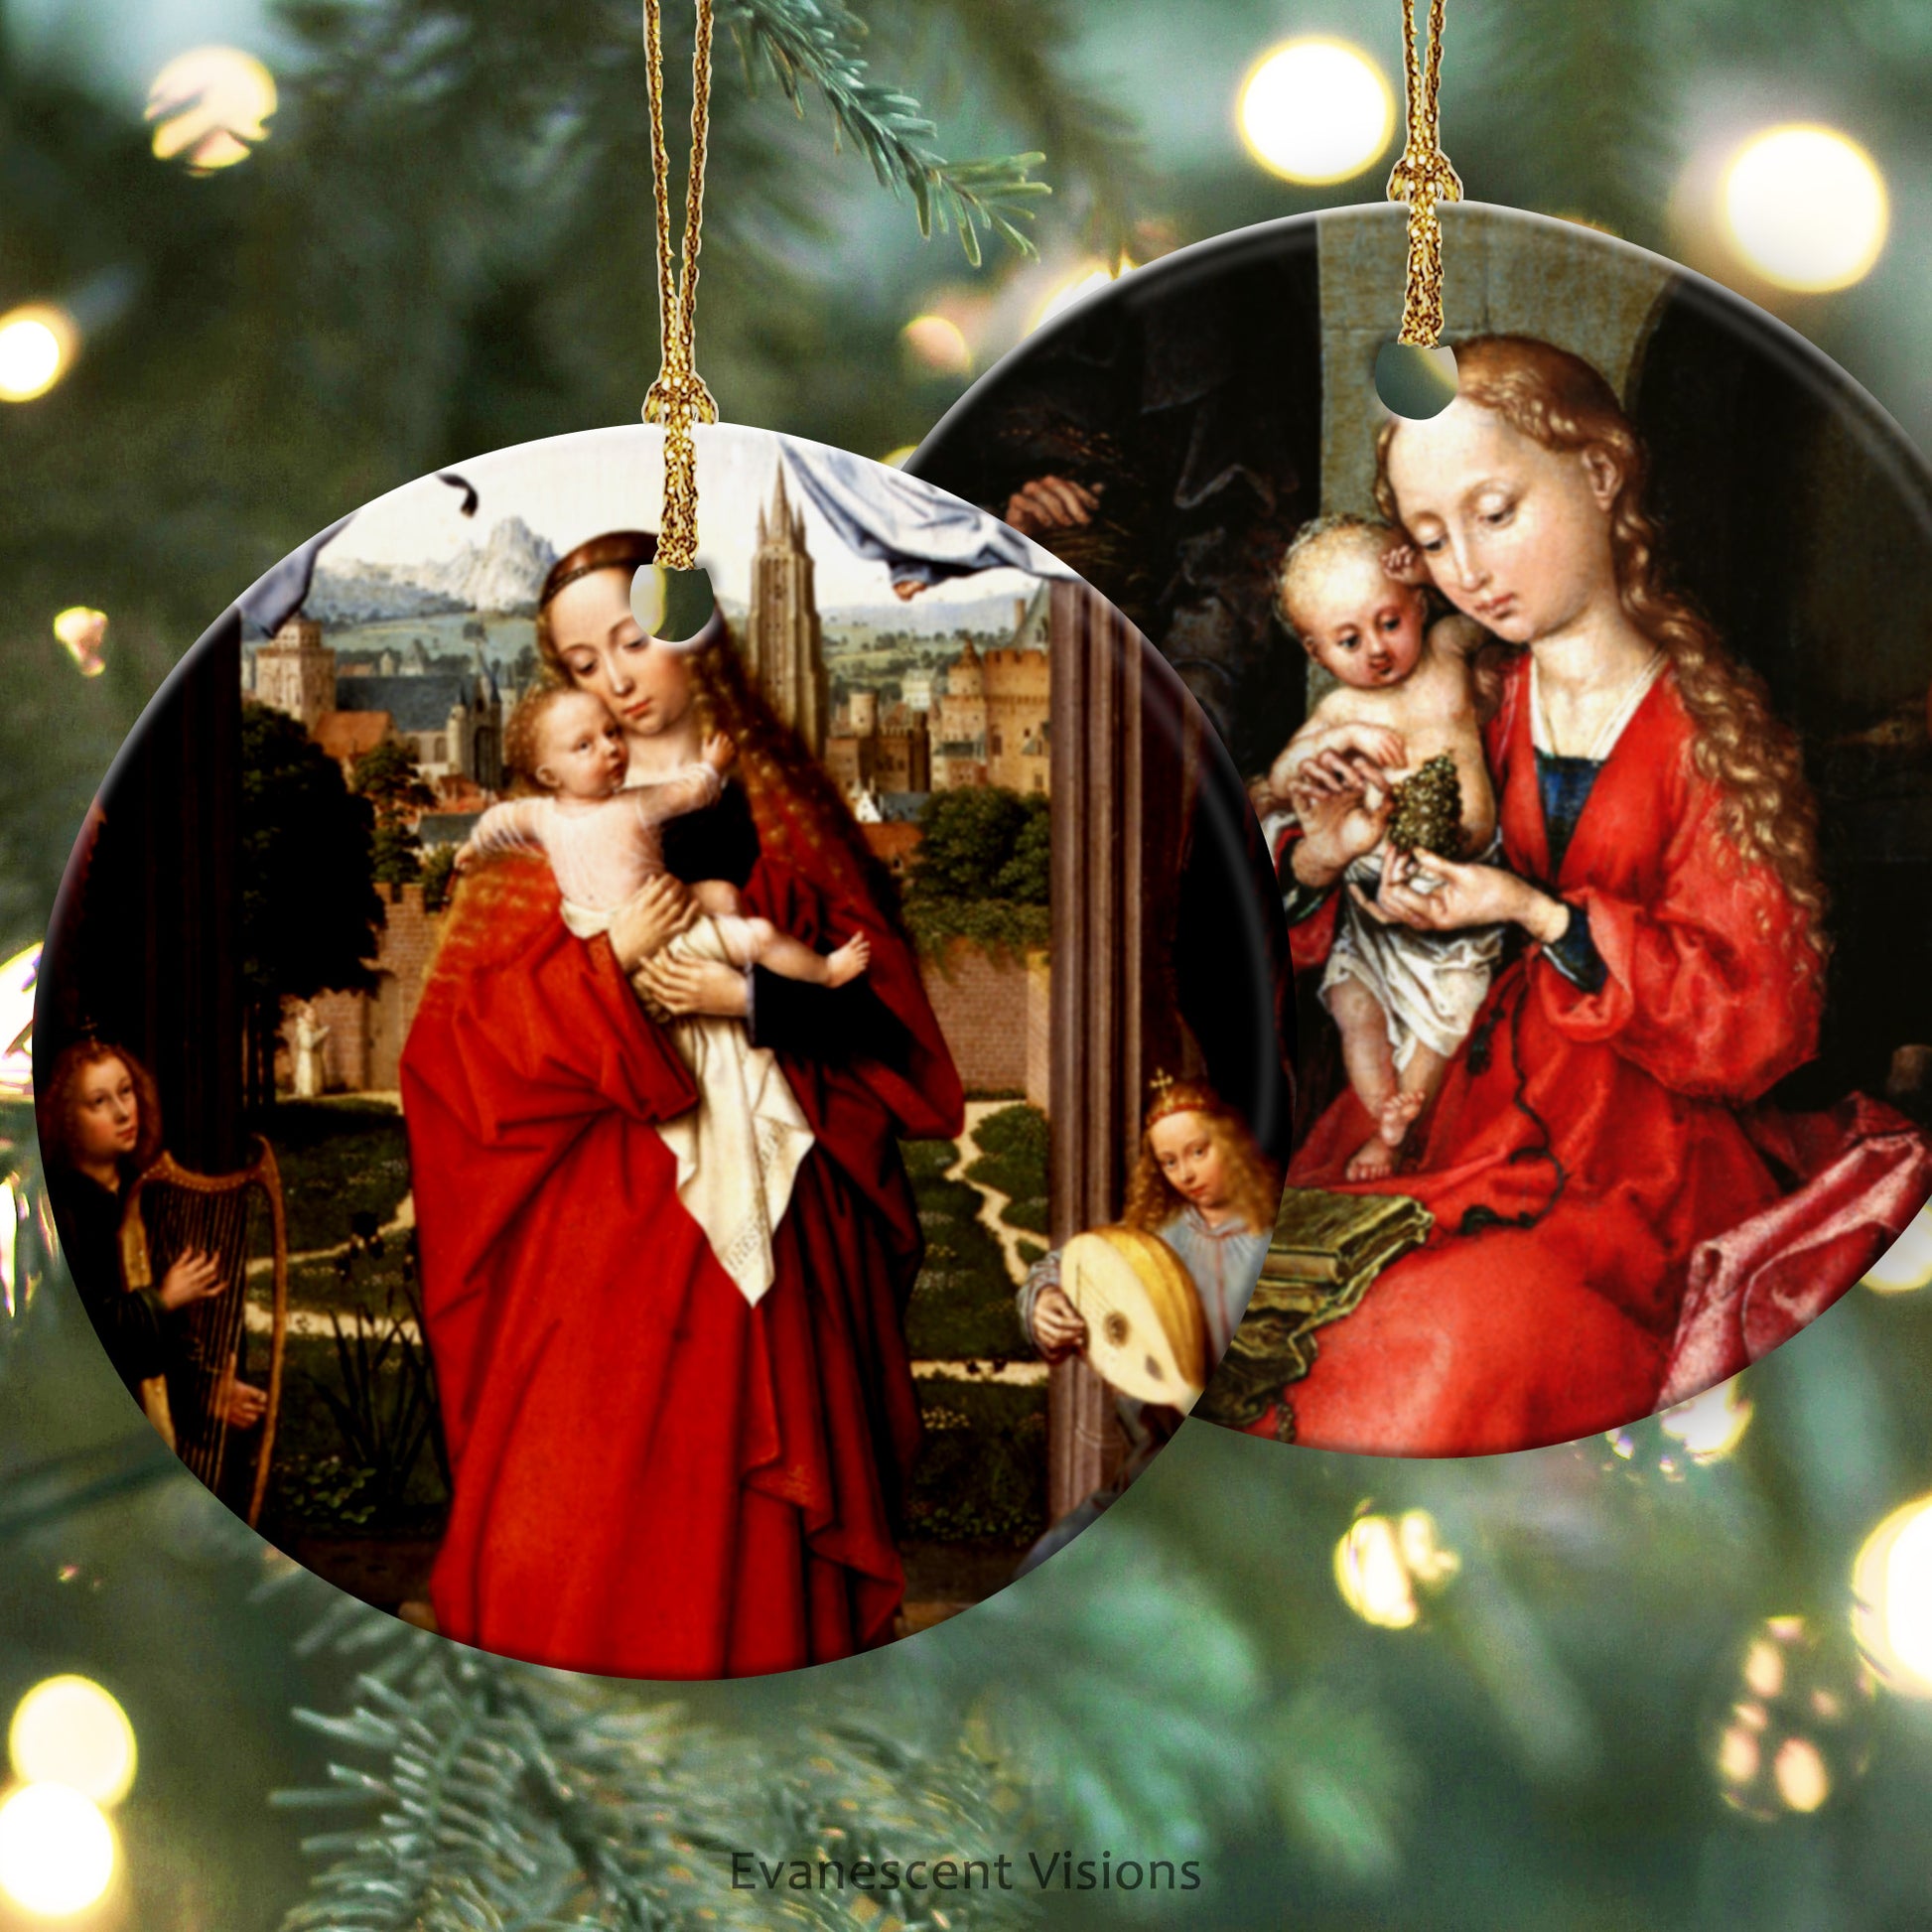 Two Ceramic Christmas ornaments with images of the Madonna and Child by Gerard David and Martin Schongauer. The ornaments are hanging with a Christmas tree and lights in the background